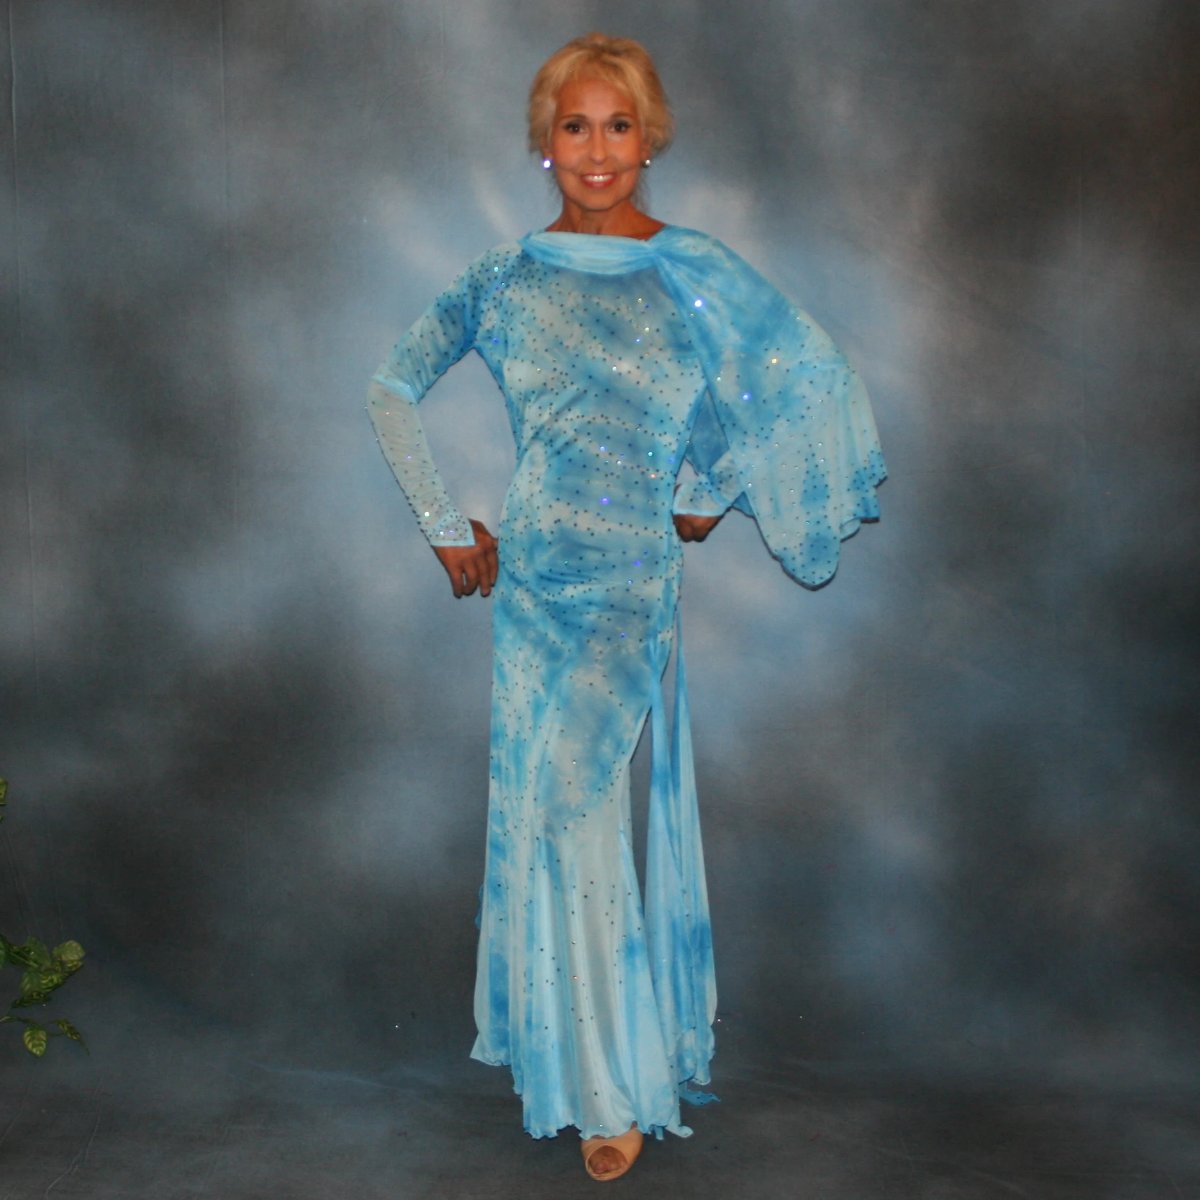 Crystal's Creations Elegant blue ballroom dress created in shades of blue printed semi sheer stretch with floats, fabulous for a solo ballroom dance or a theatrical ballroom number…embellished with Swarovski rhinestone work in shades of capri blue & aquamarine